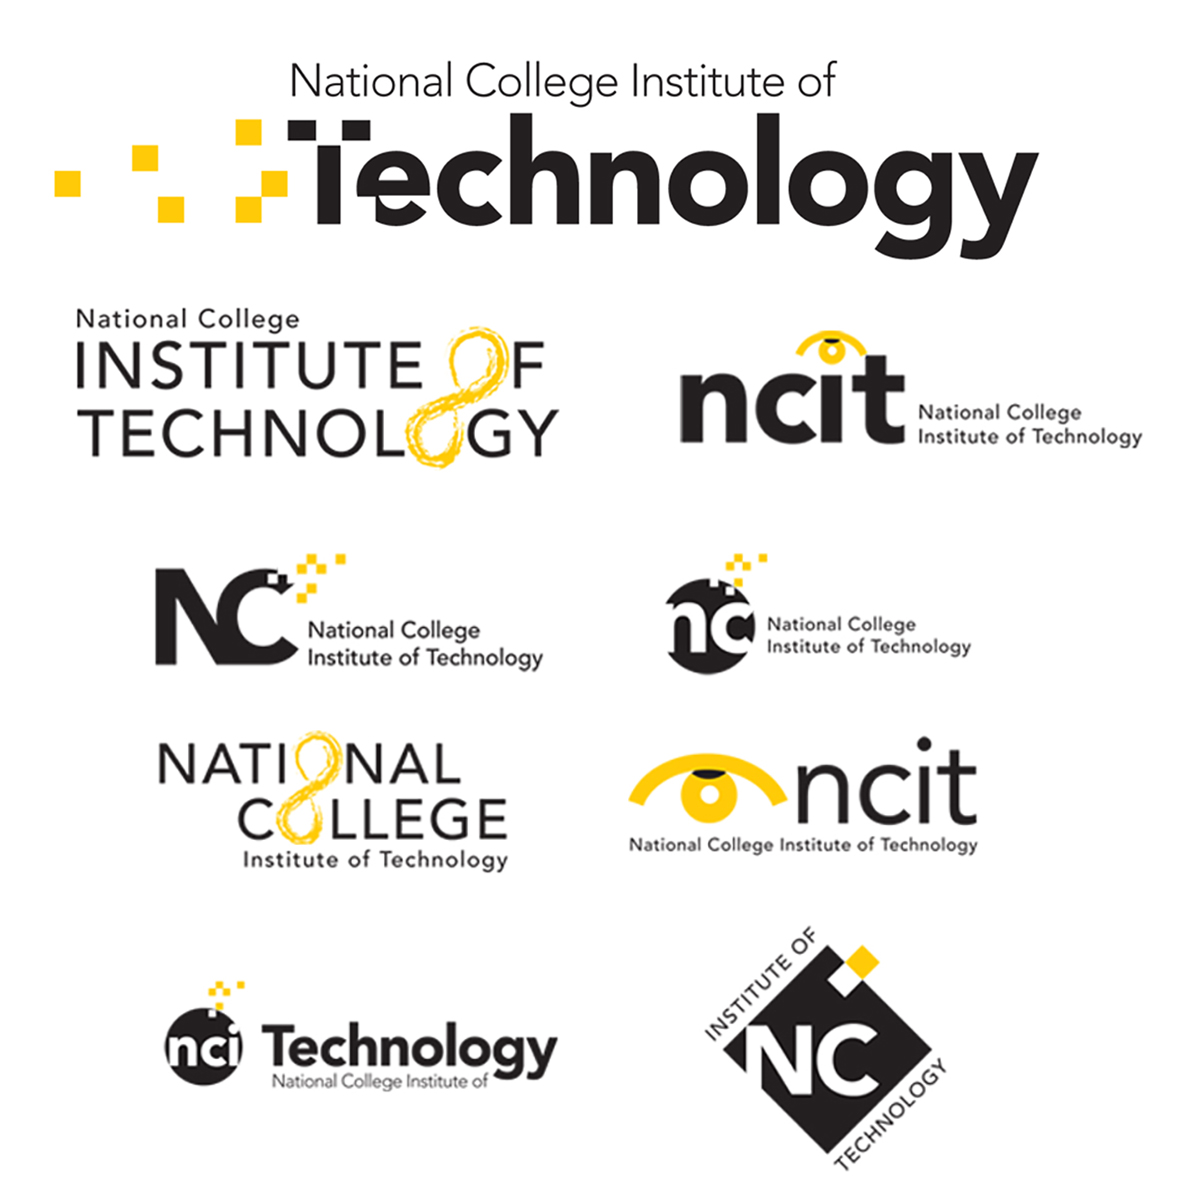 National College Institute of Technology